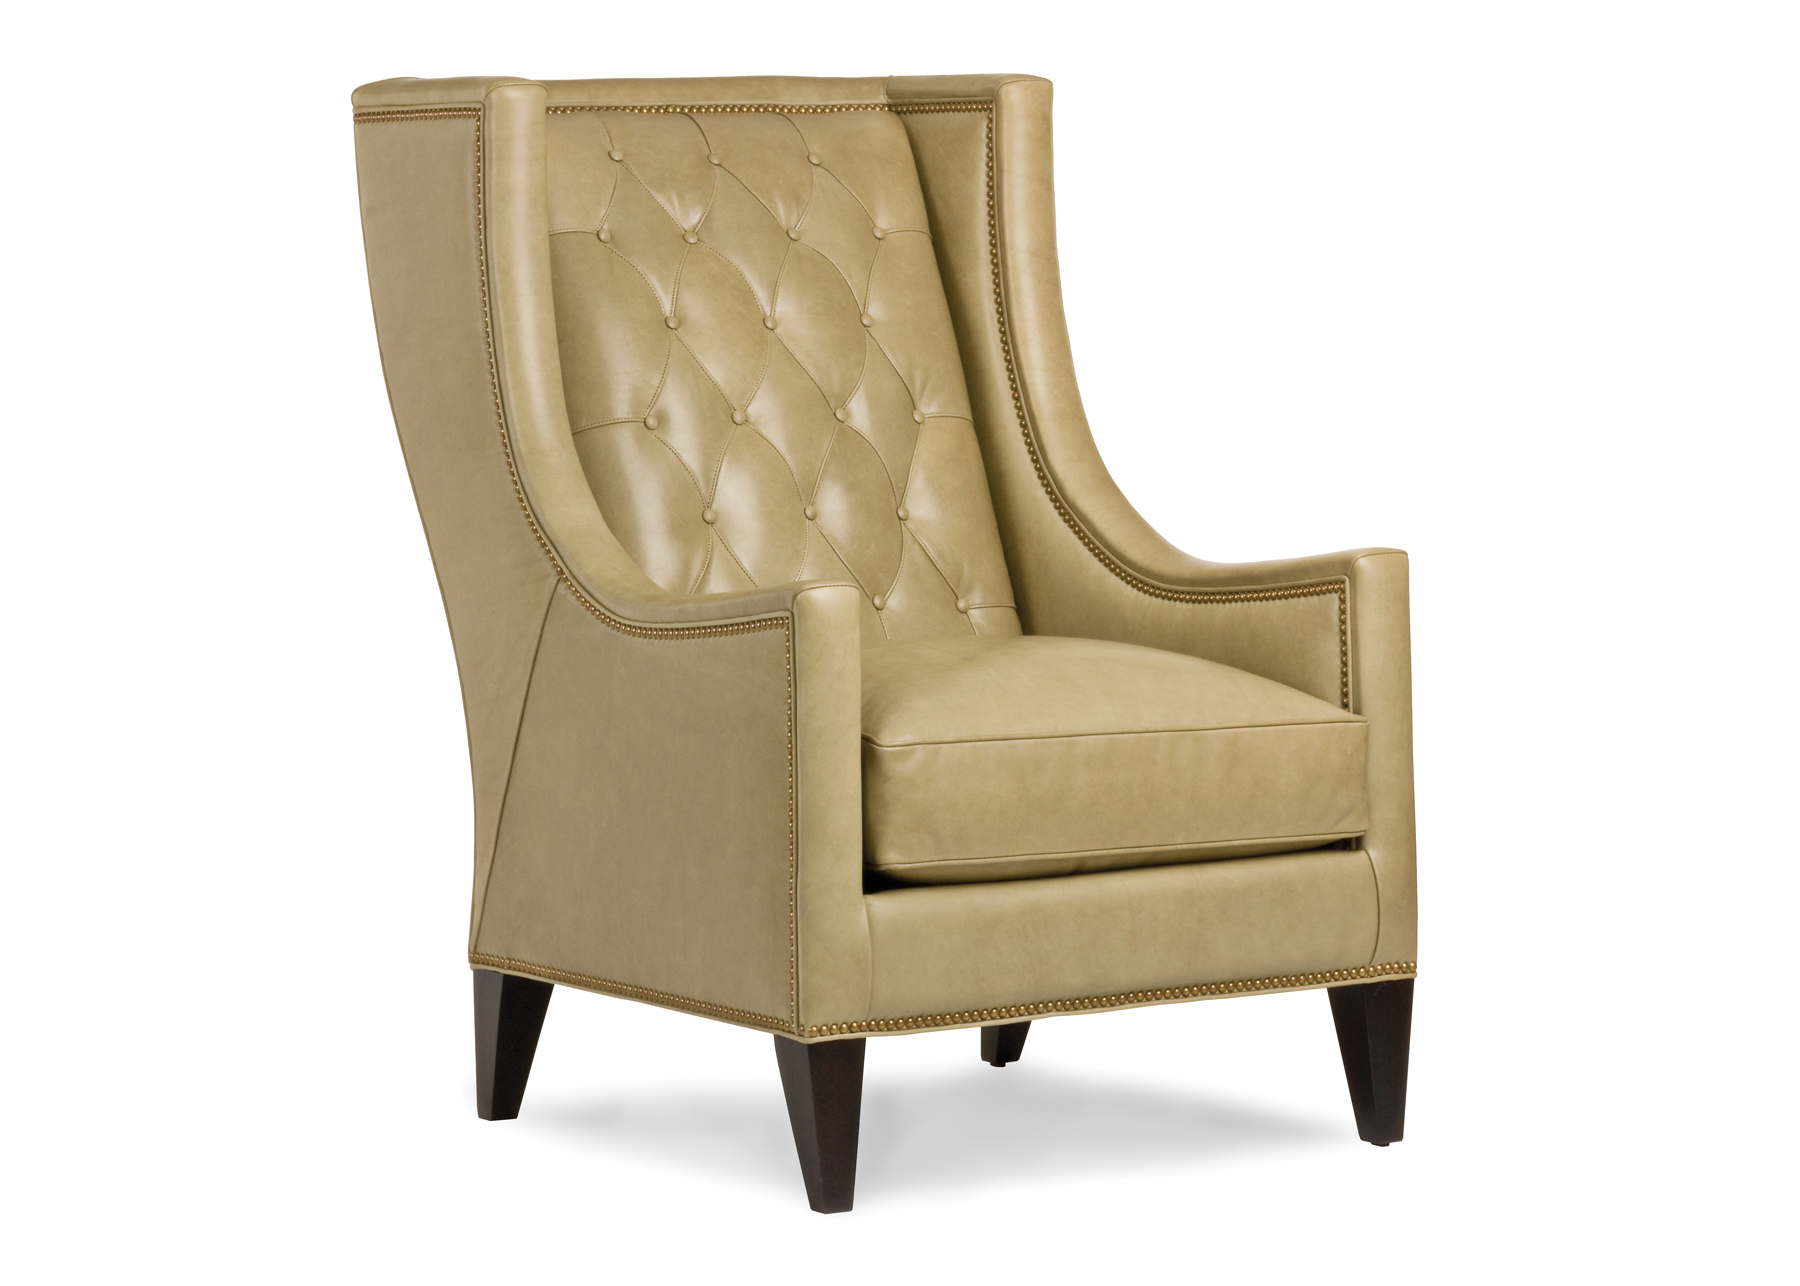 LUXE BUTTON TUFTED CHAIR